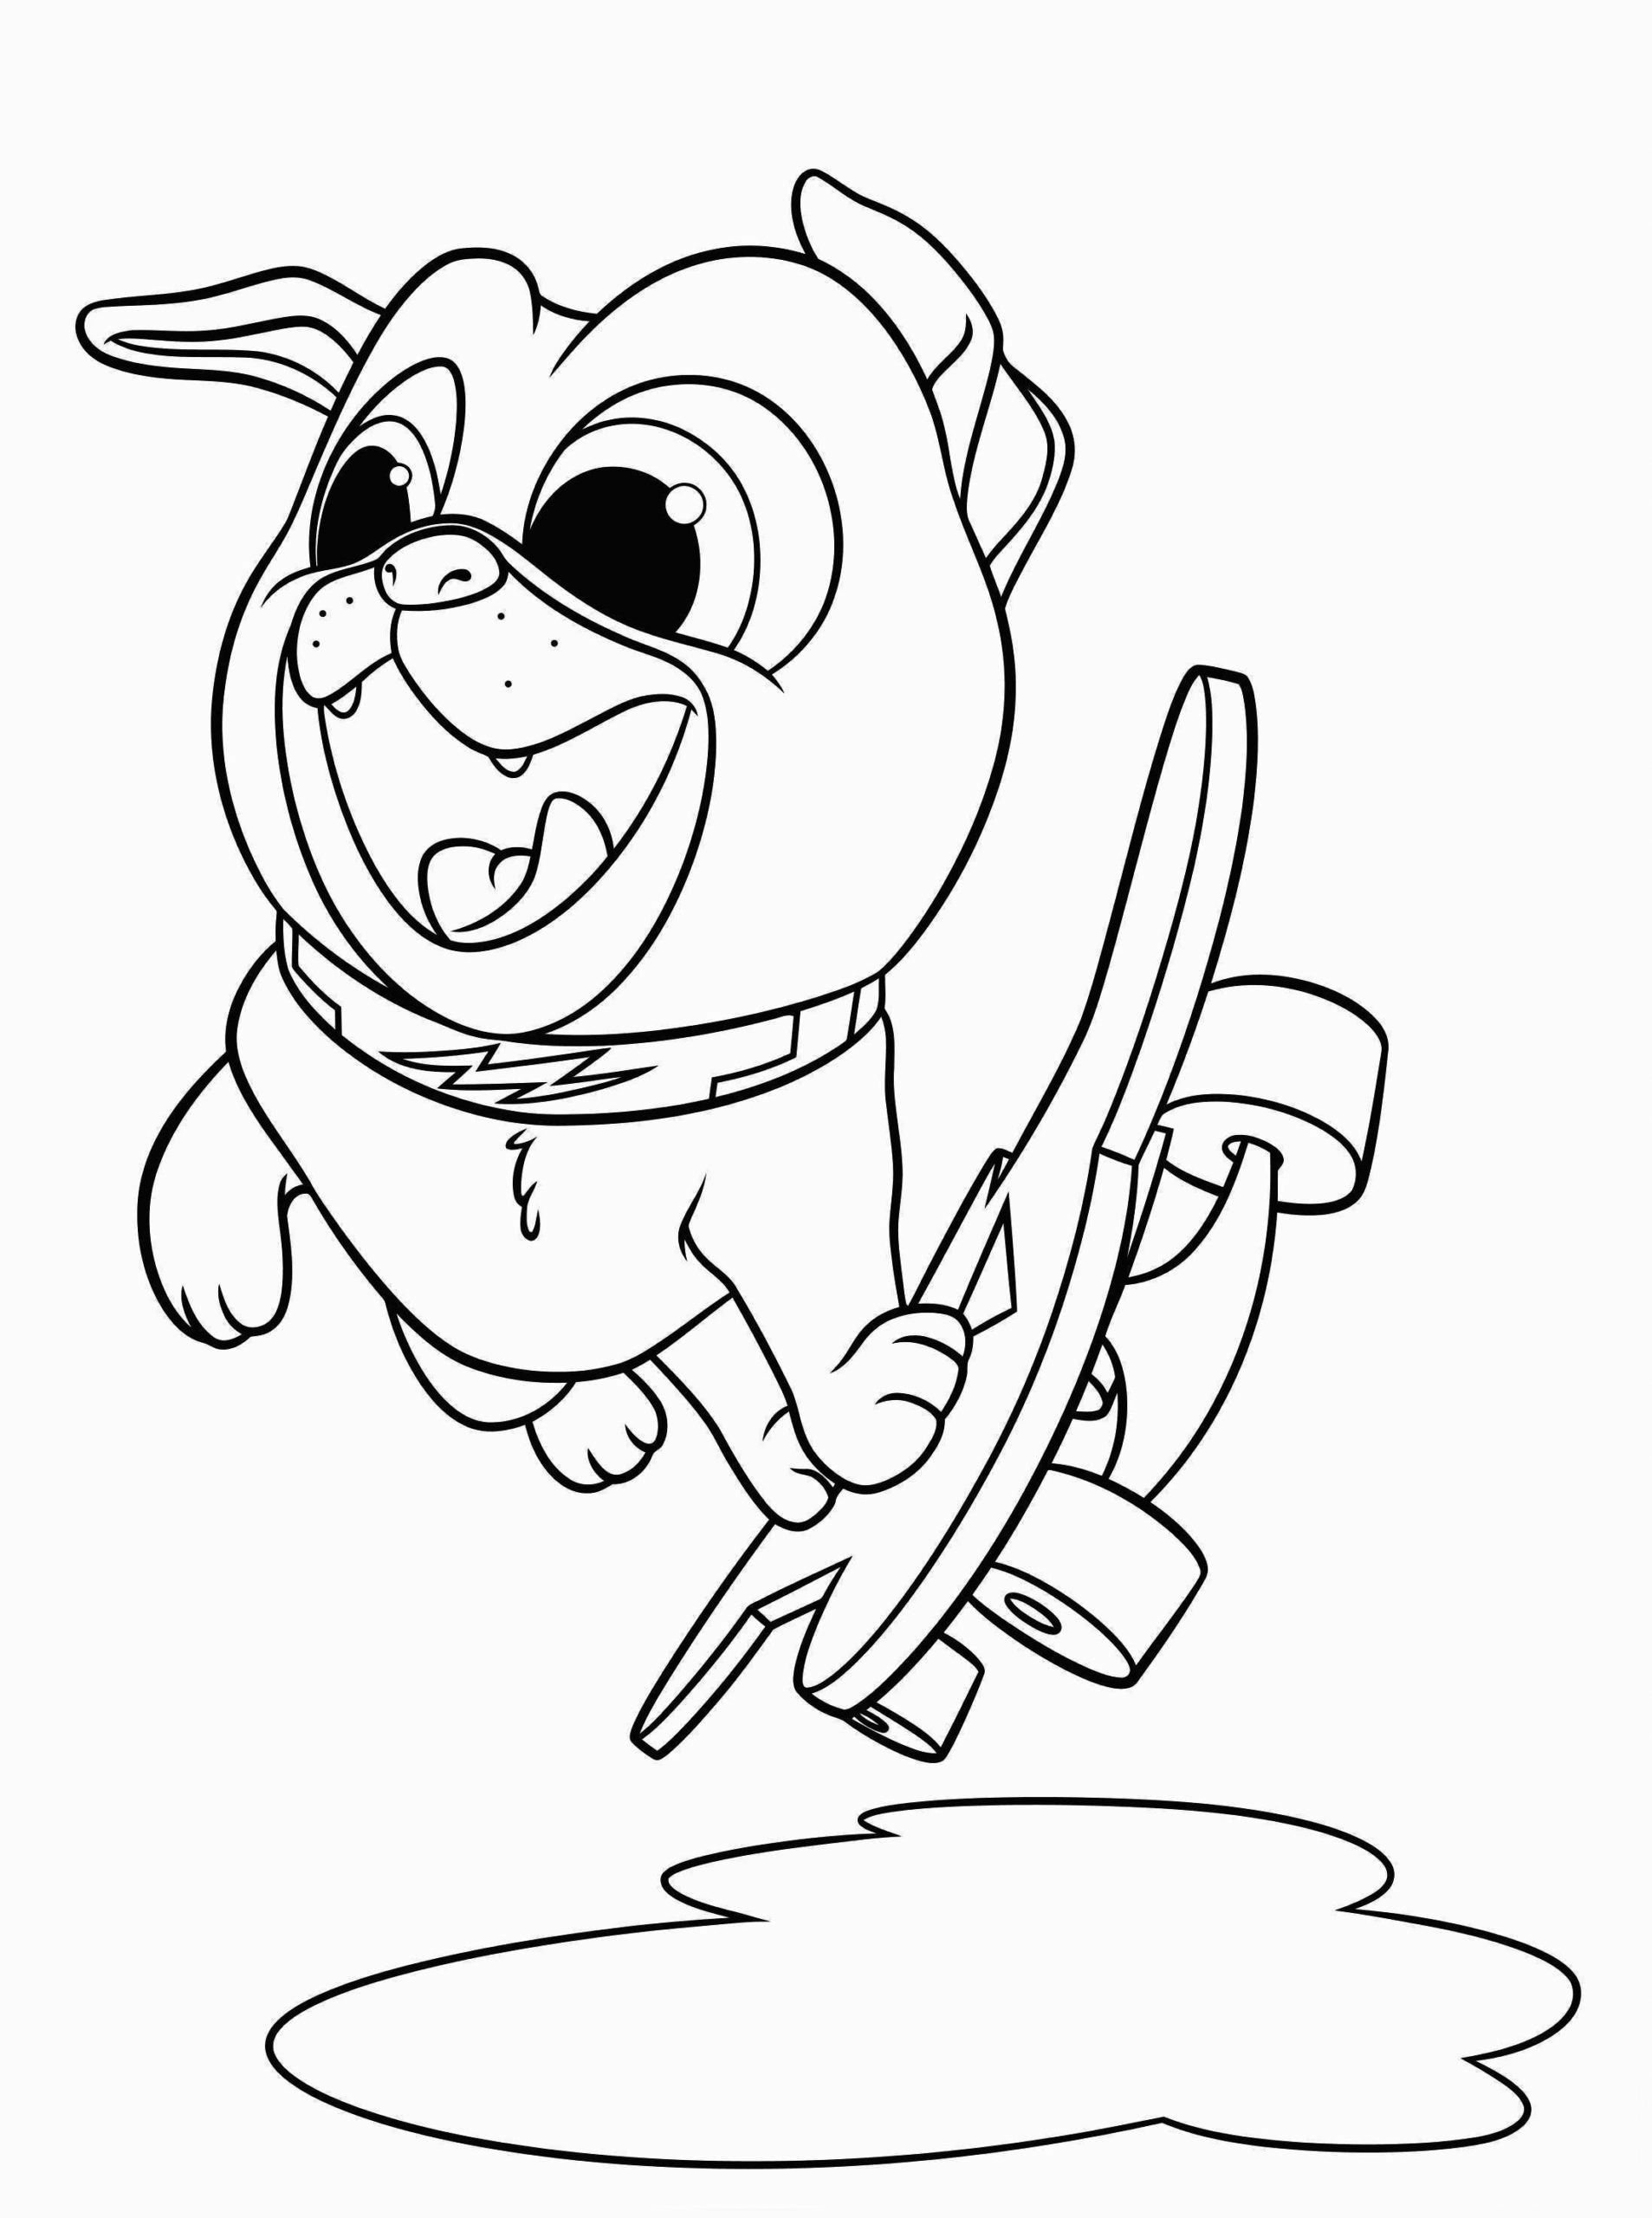 Puppy Dog Pals Skateboarding Coloring Pages